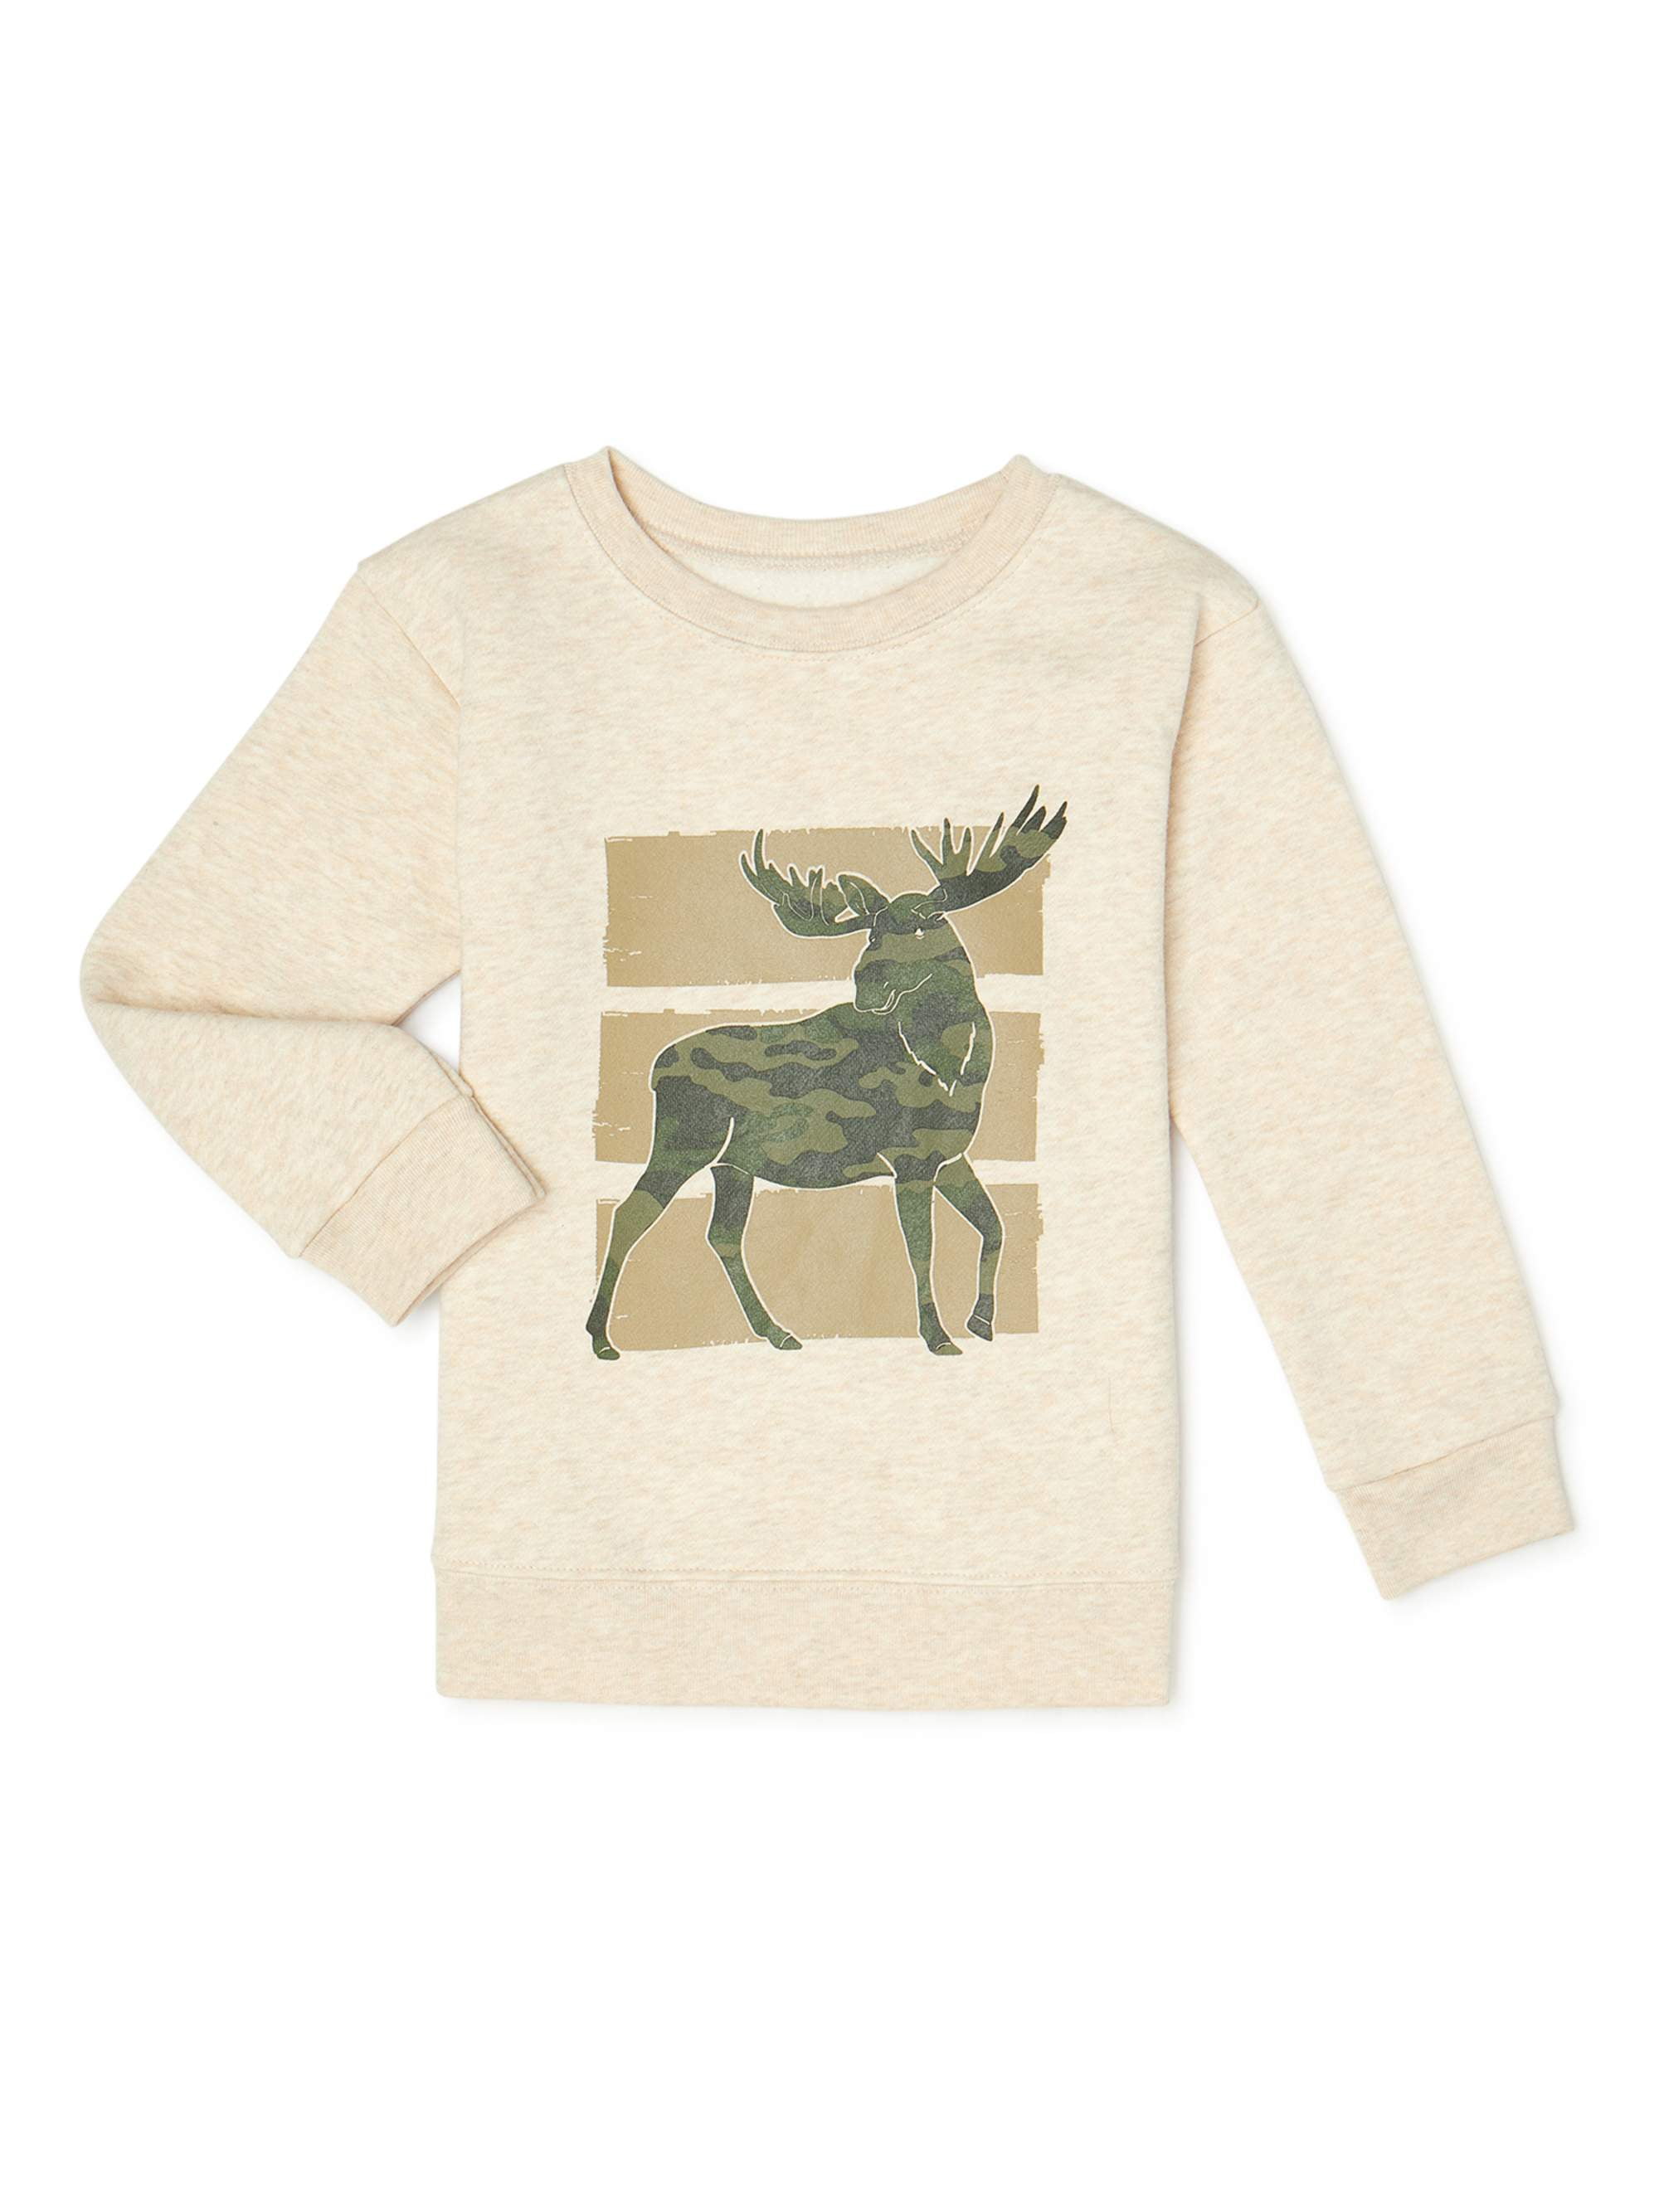 18m-5t Baby Boy and Girl Winter Moose Cashmere Sweater Jacket